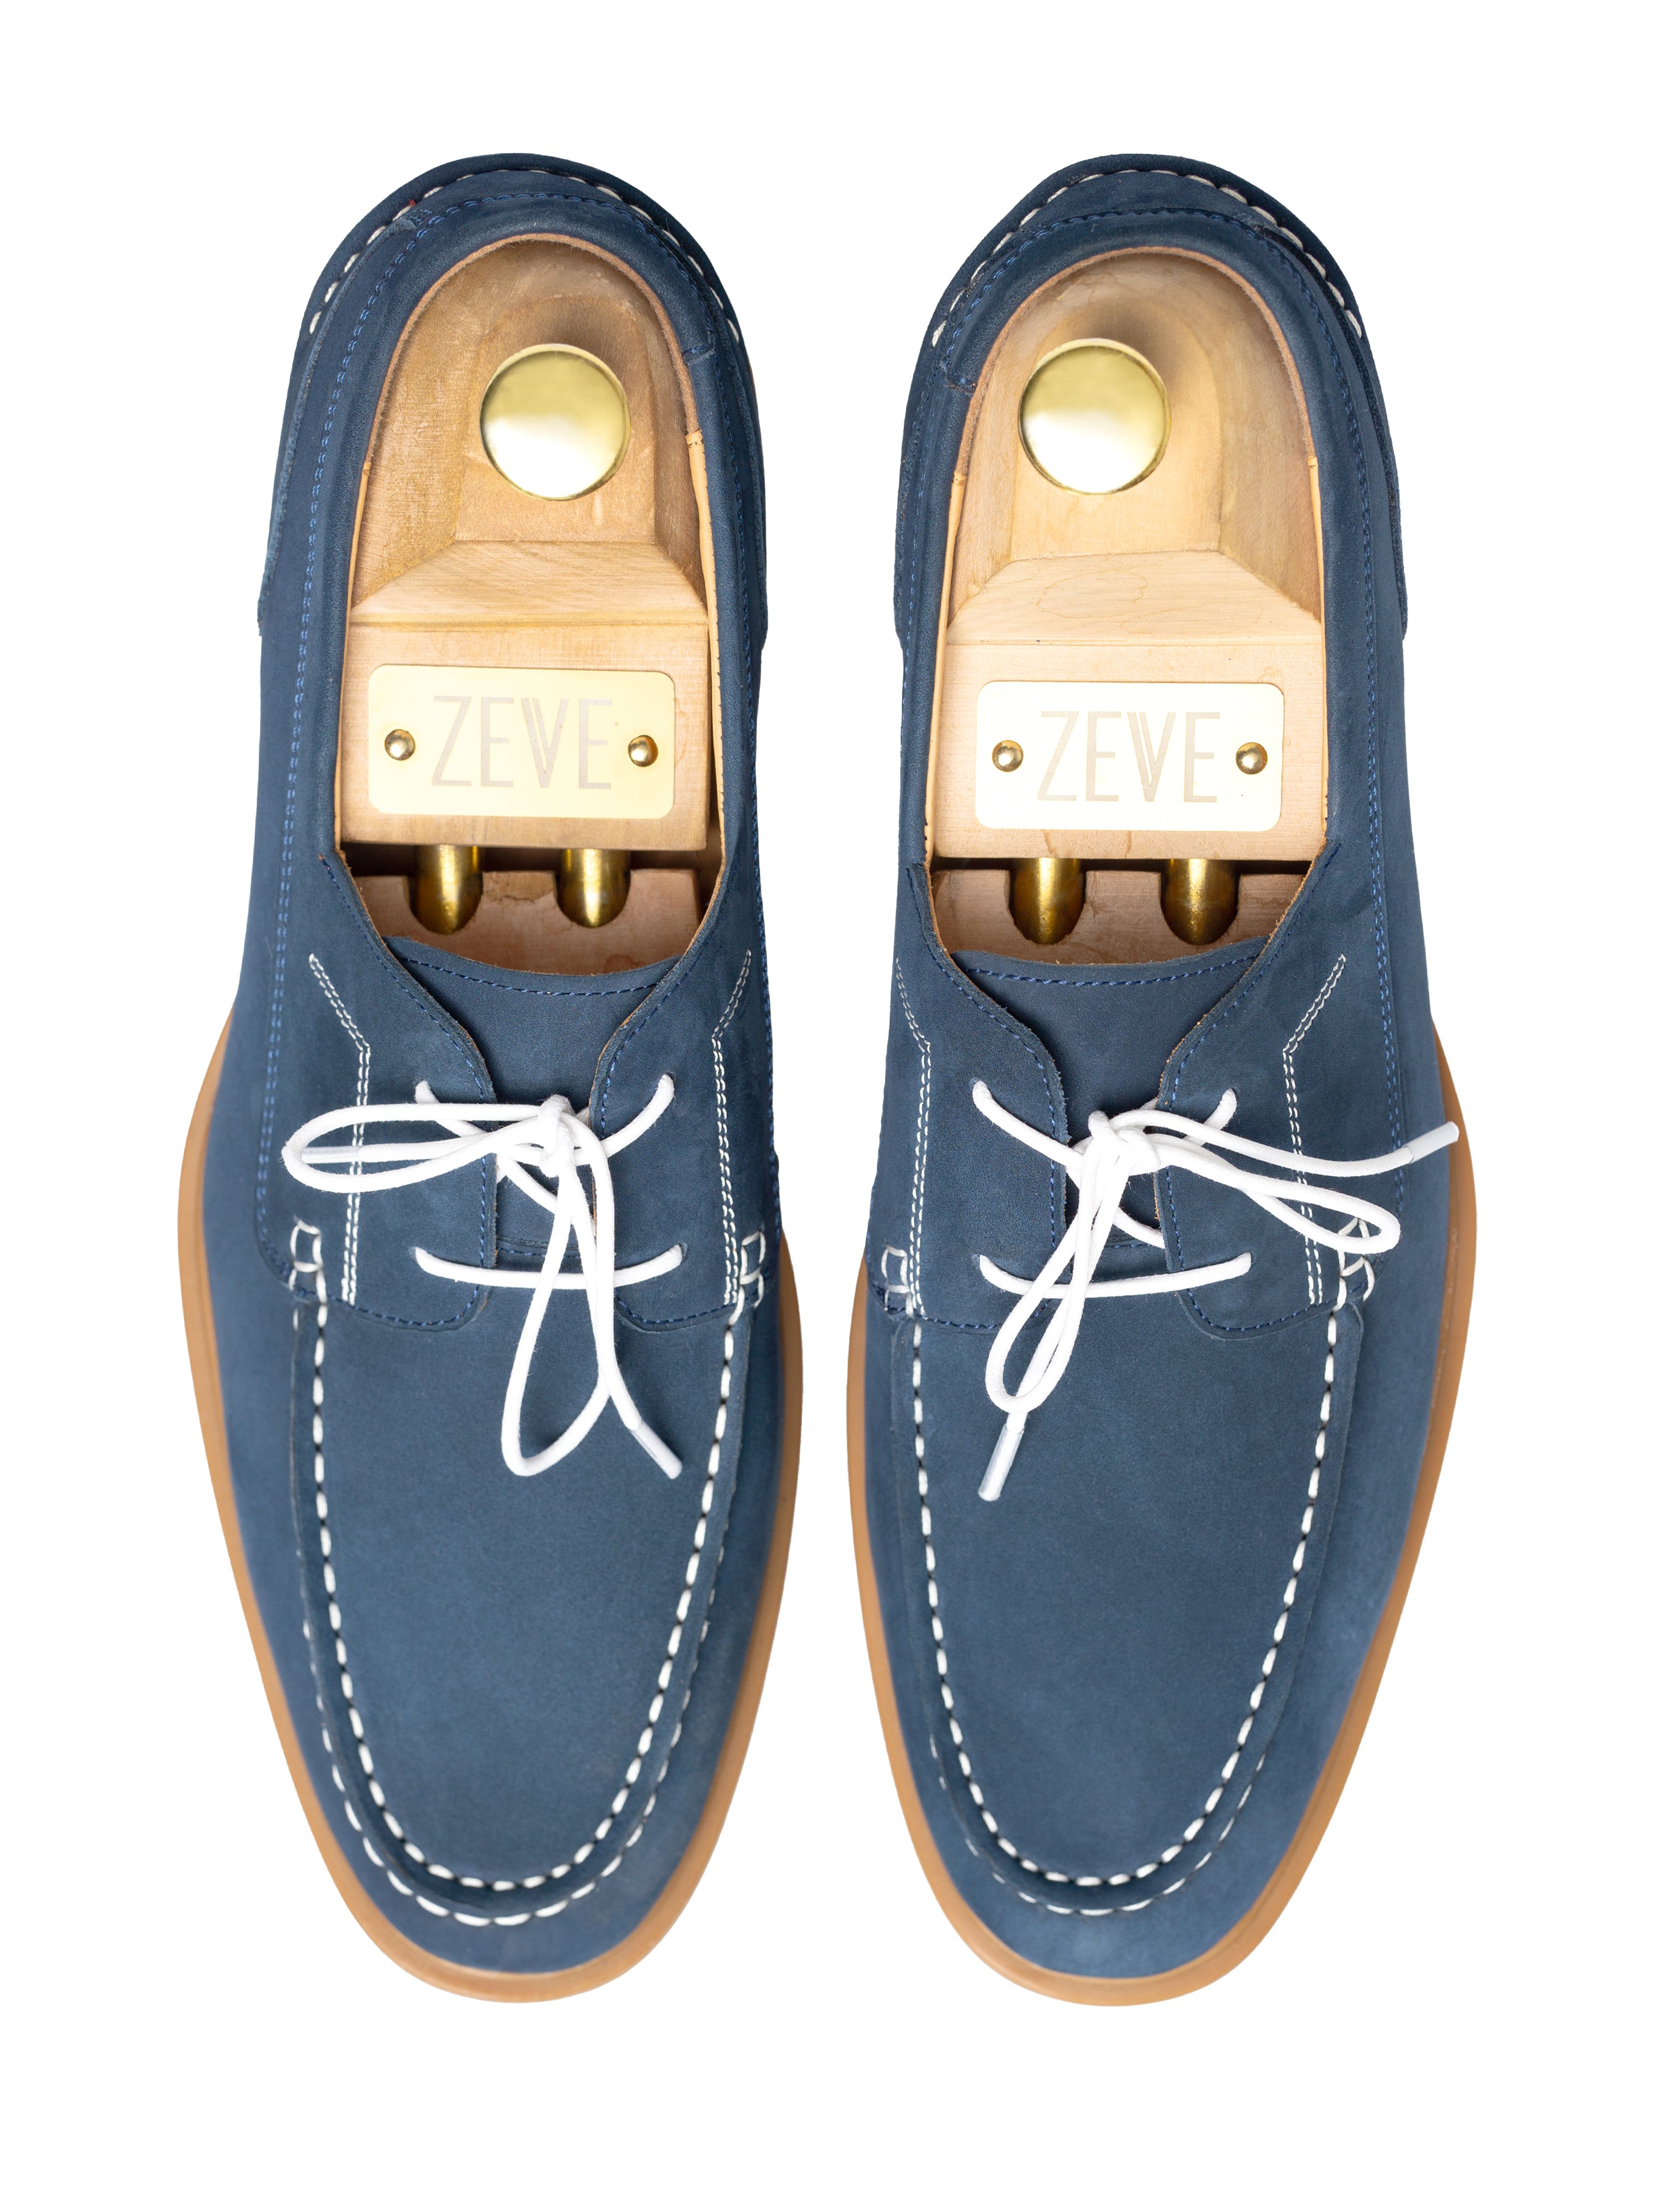 Boat Shoes - Navy Suede Leather (Soflex Sole) - Zeve Shoes